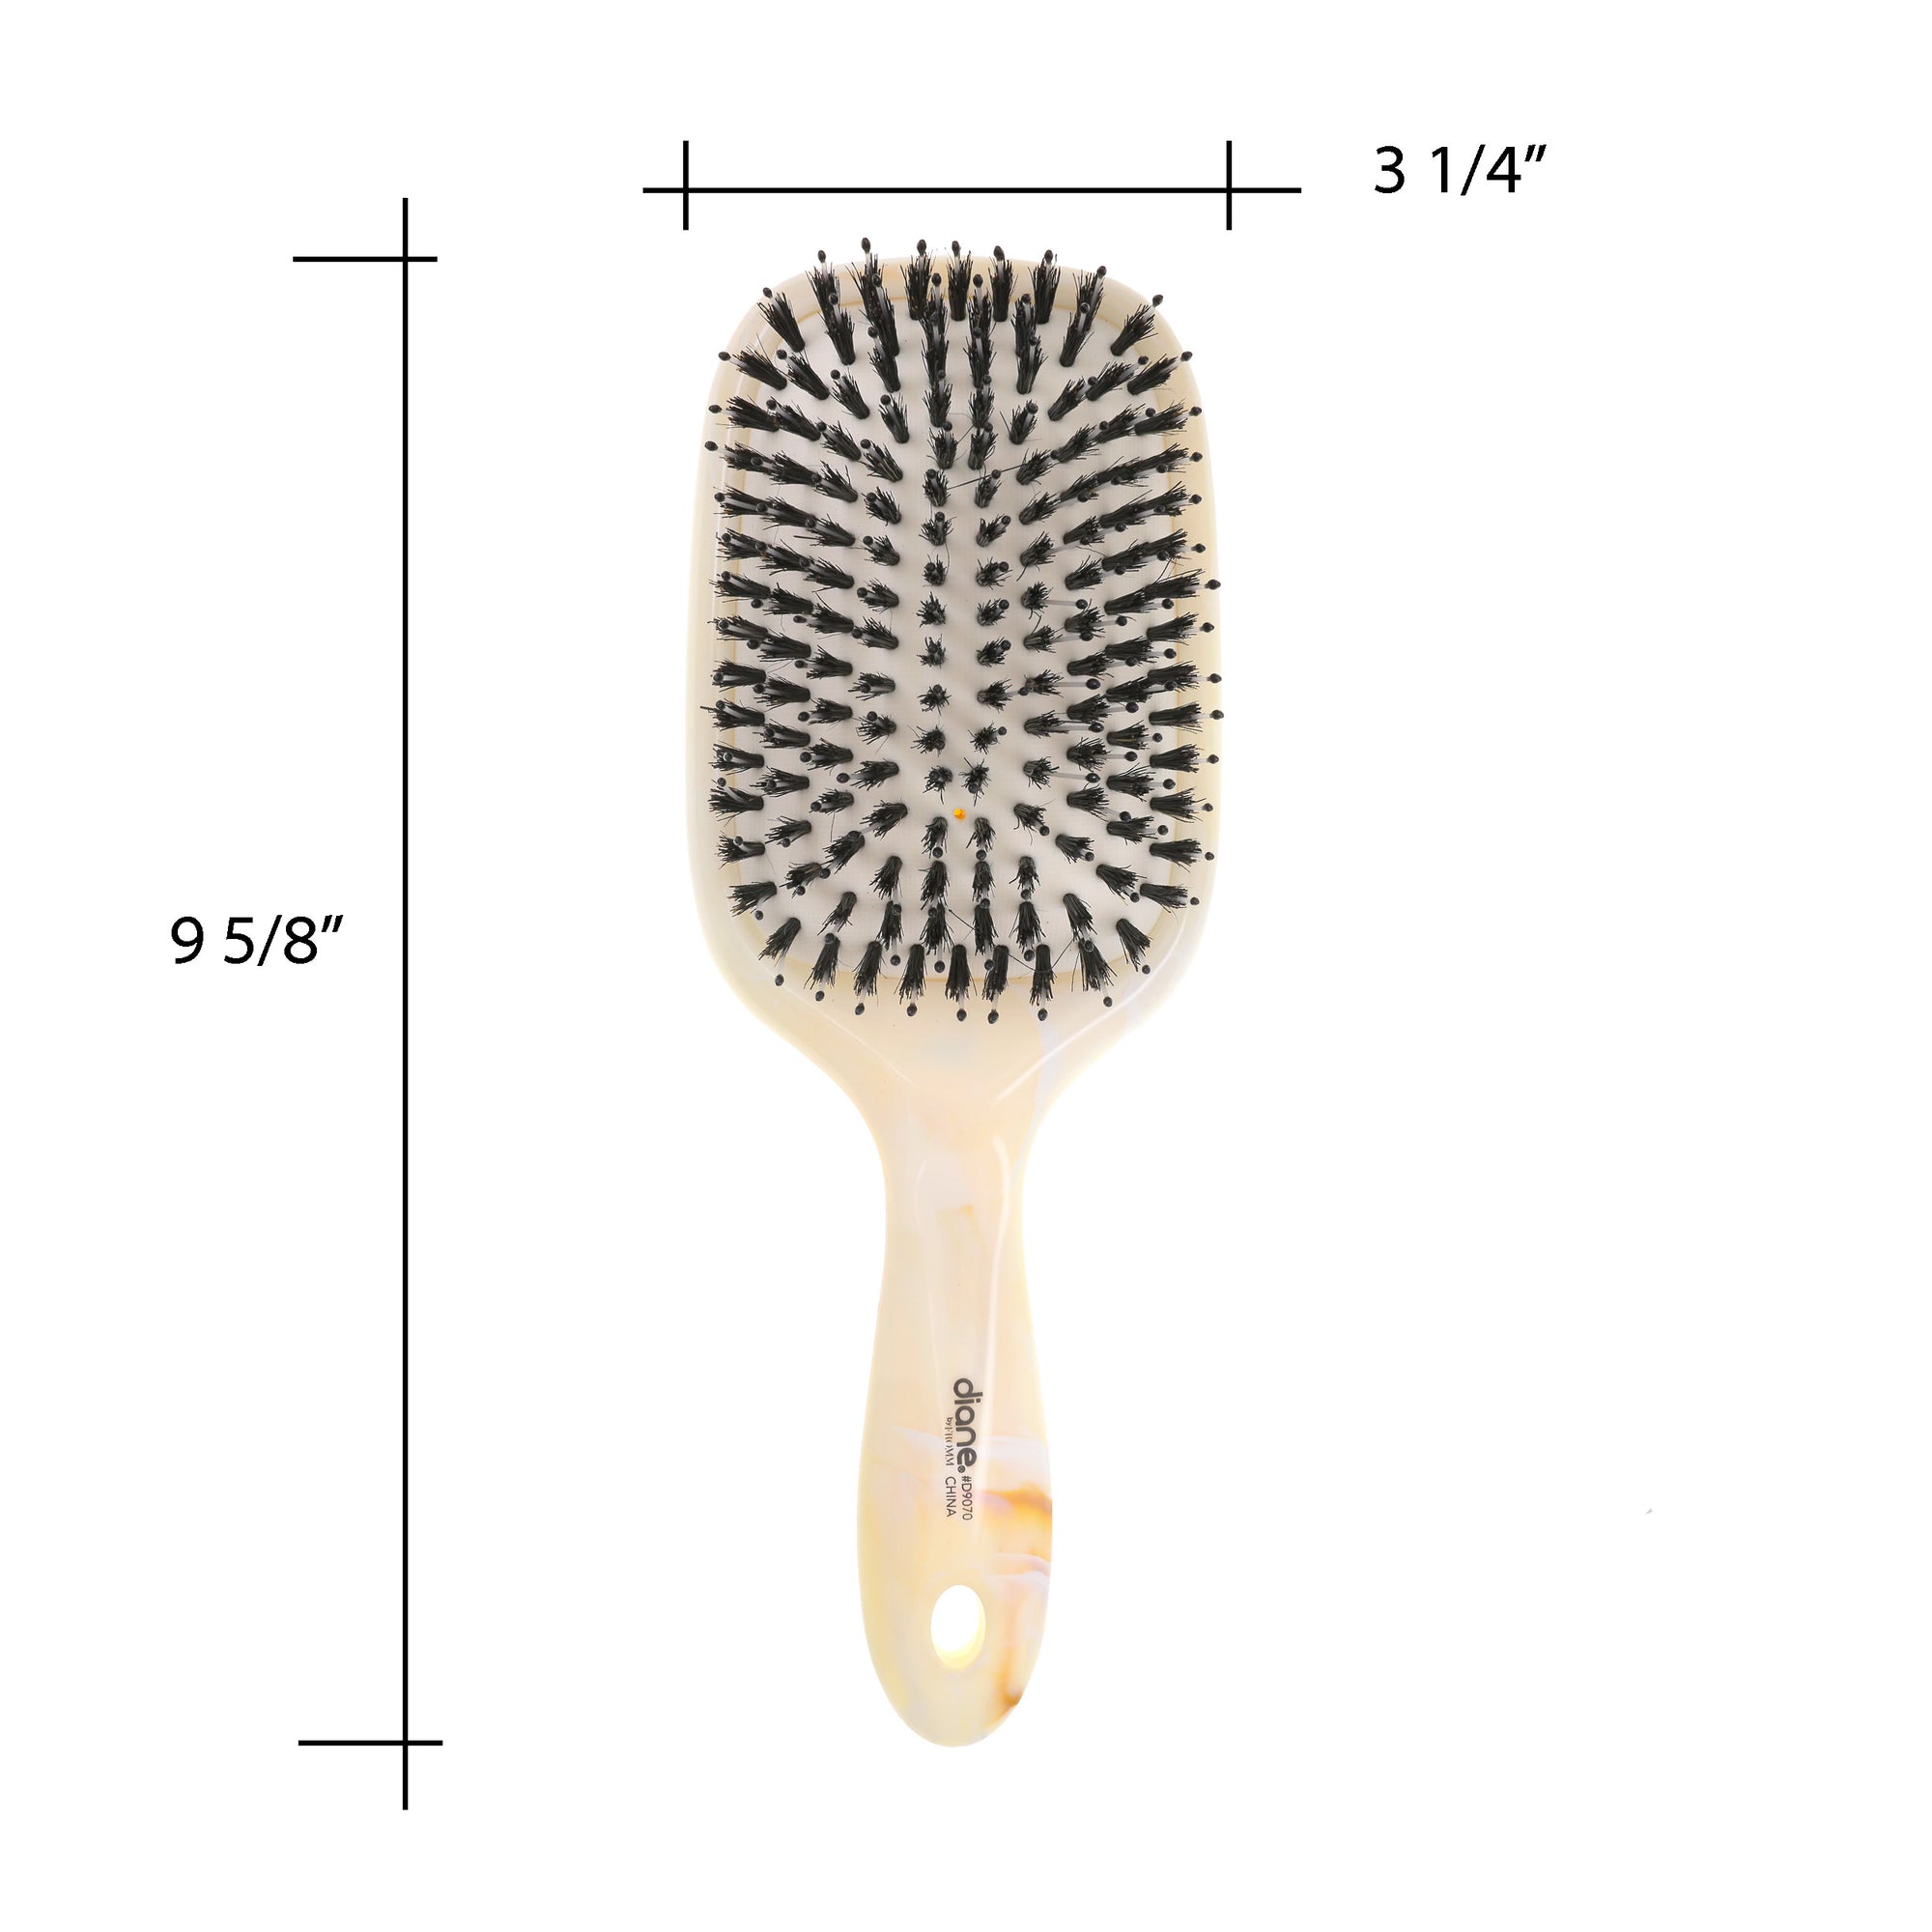 Ball-Tipped and Natural Bristle Paddle Hair Brush with Cushion